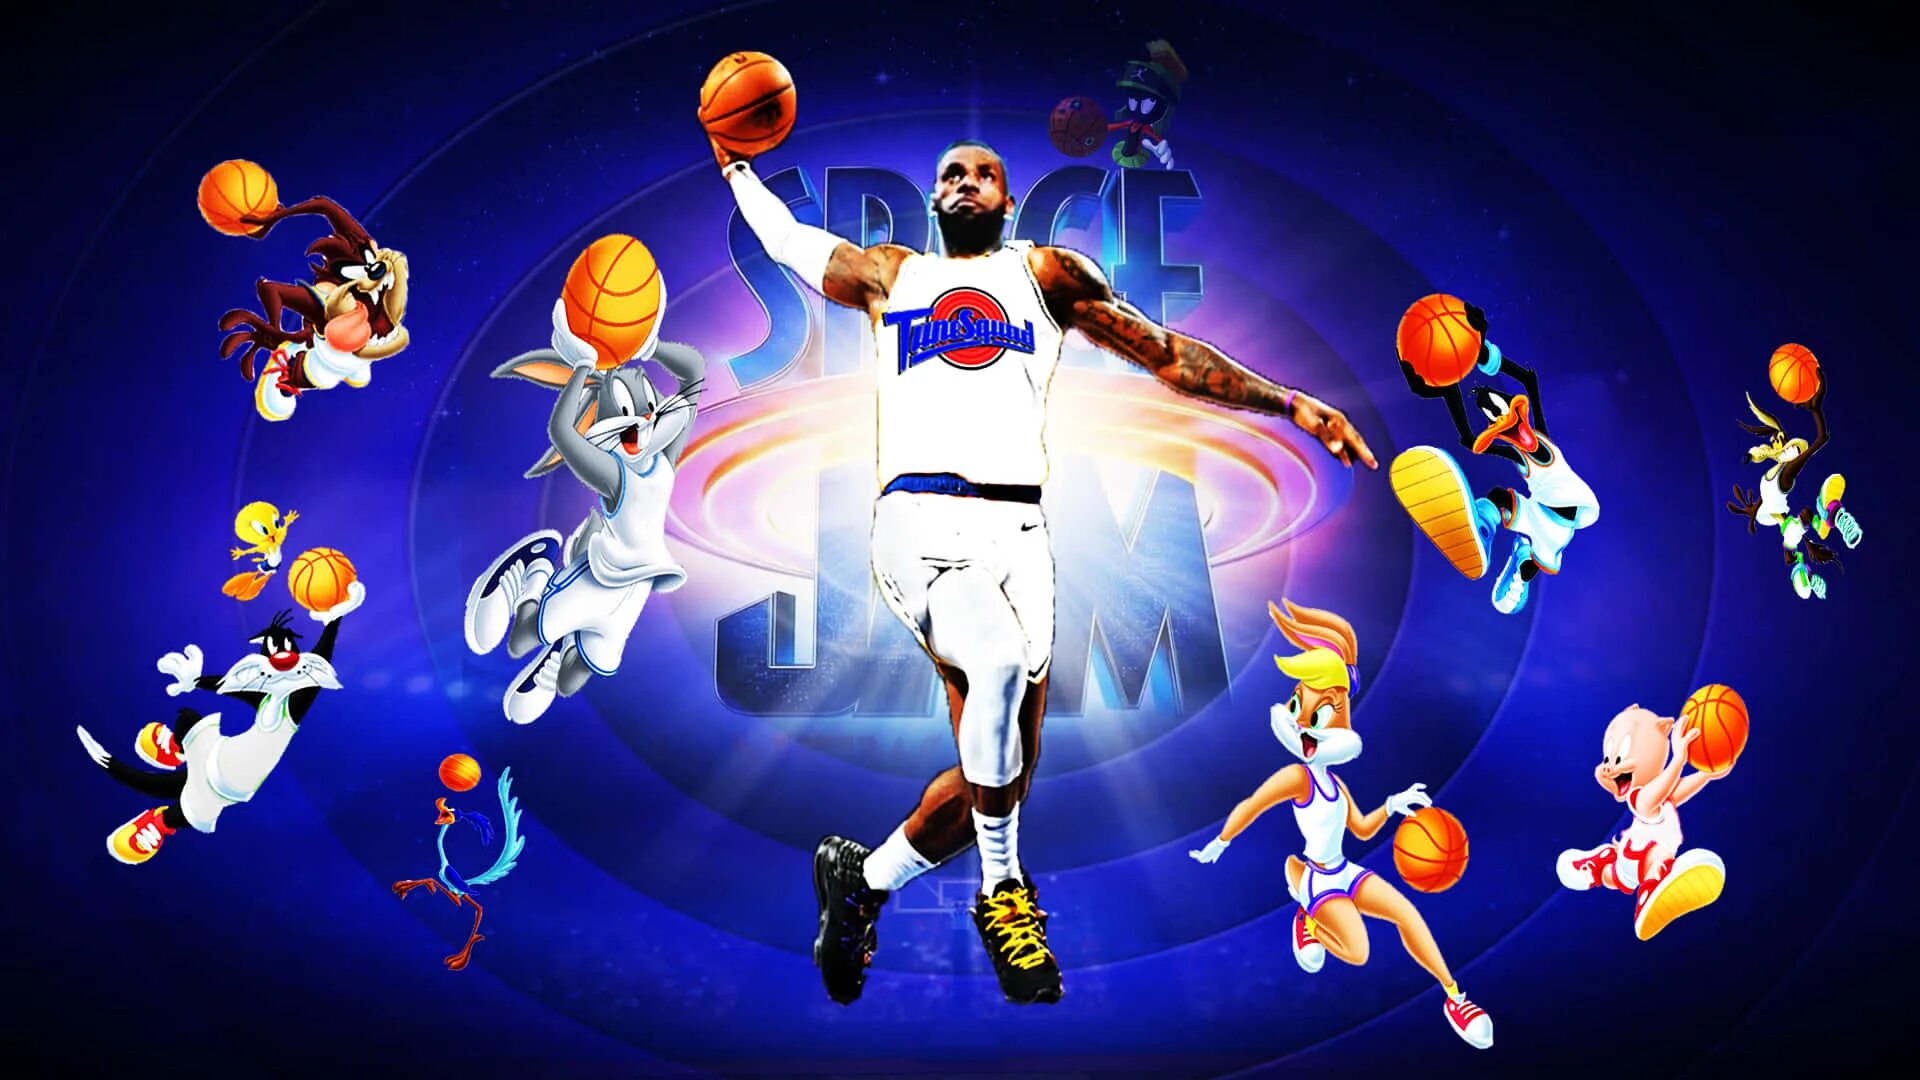 Tune squad. Багз Банни космический джем 2. Космический баскетбол 2 (Space Jam). Space Jam a New Legacy 2021. Space Jam 2 Постер.